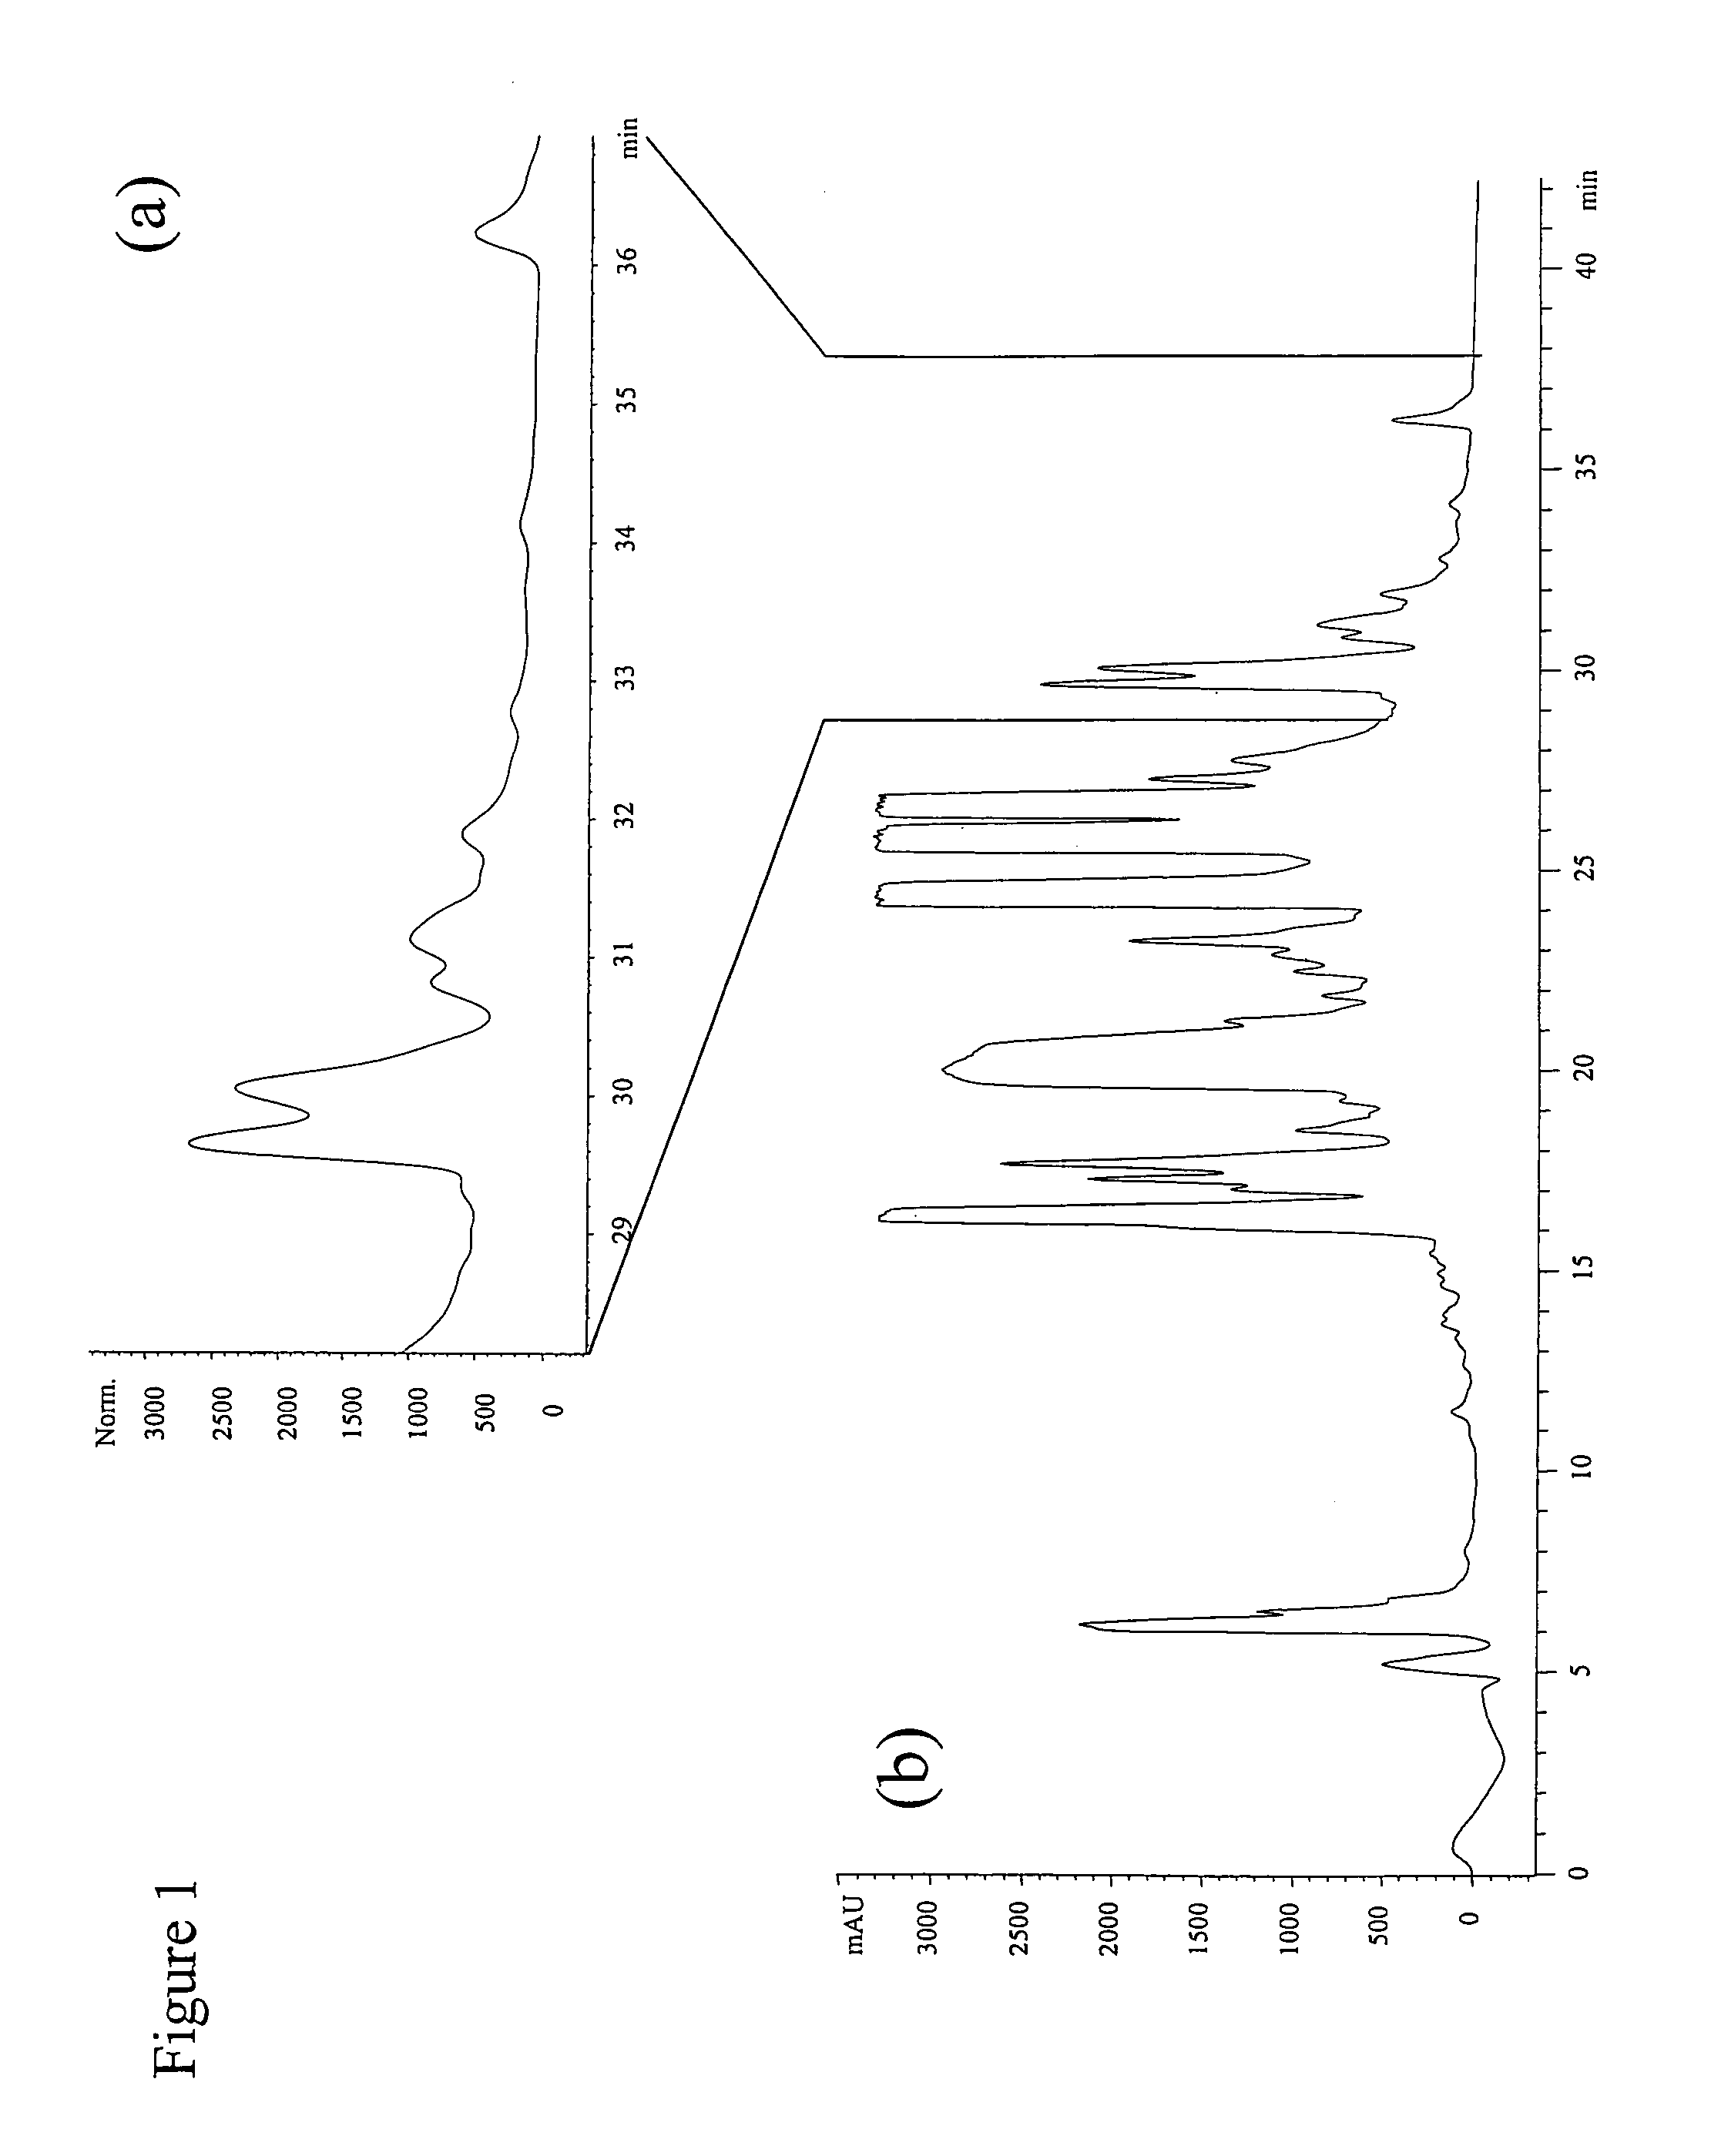 Nucleic acid molecules encoding cyclotide polypeptides and methods of use